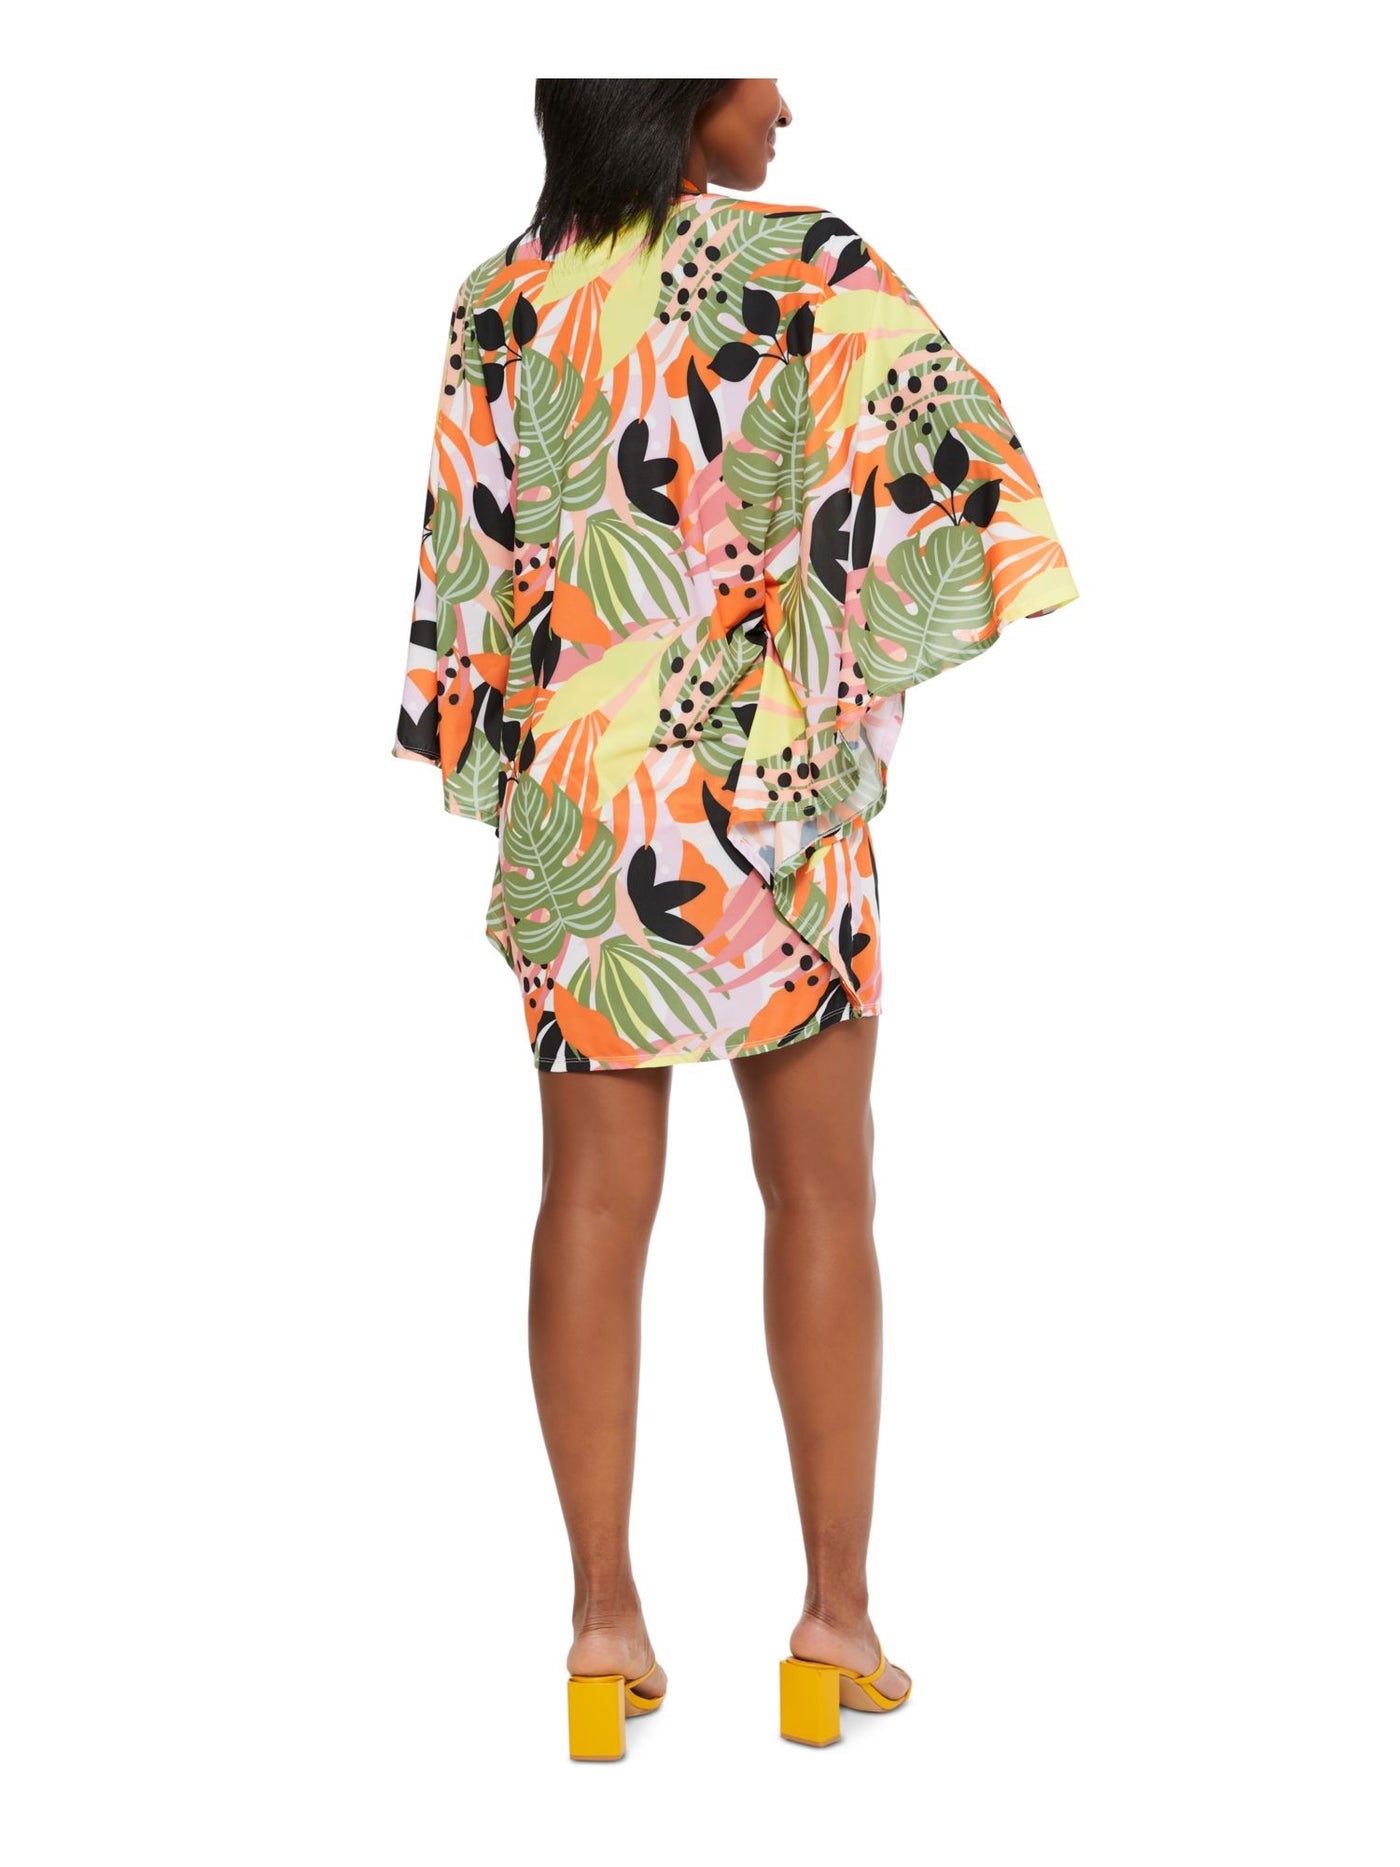 BAR III Women's Yellow Printed Caftan Deep V Neck Swimsuit Cover Up S